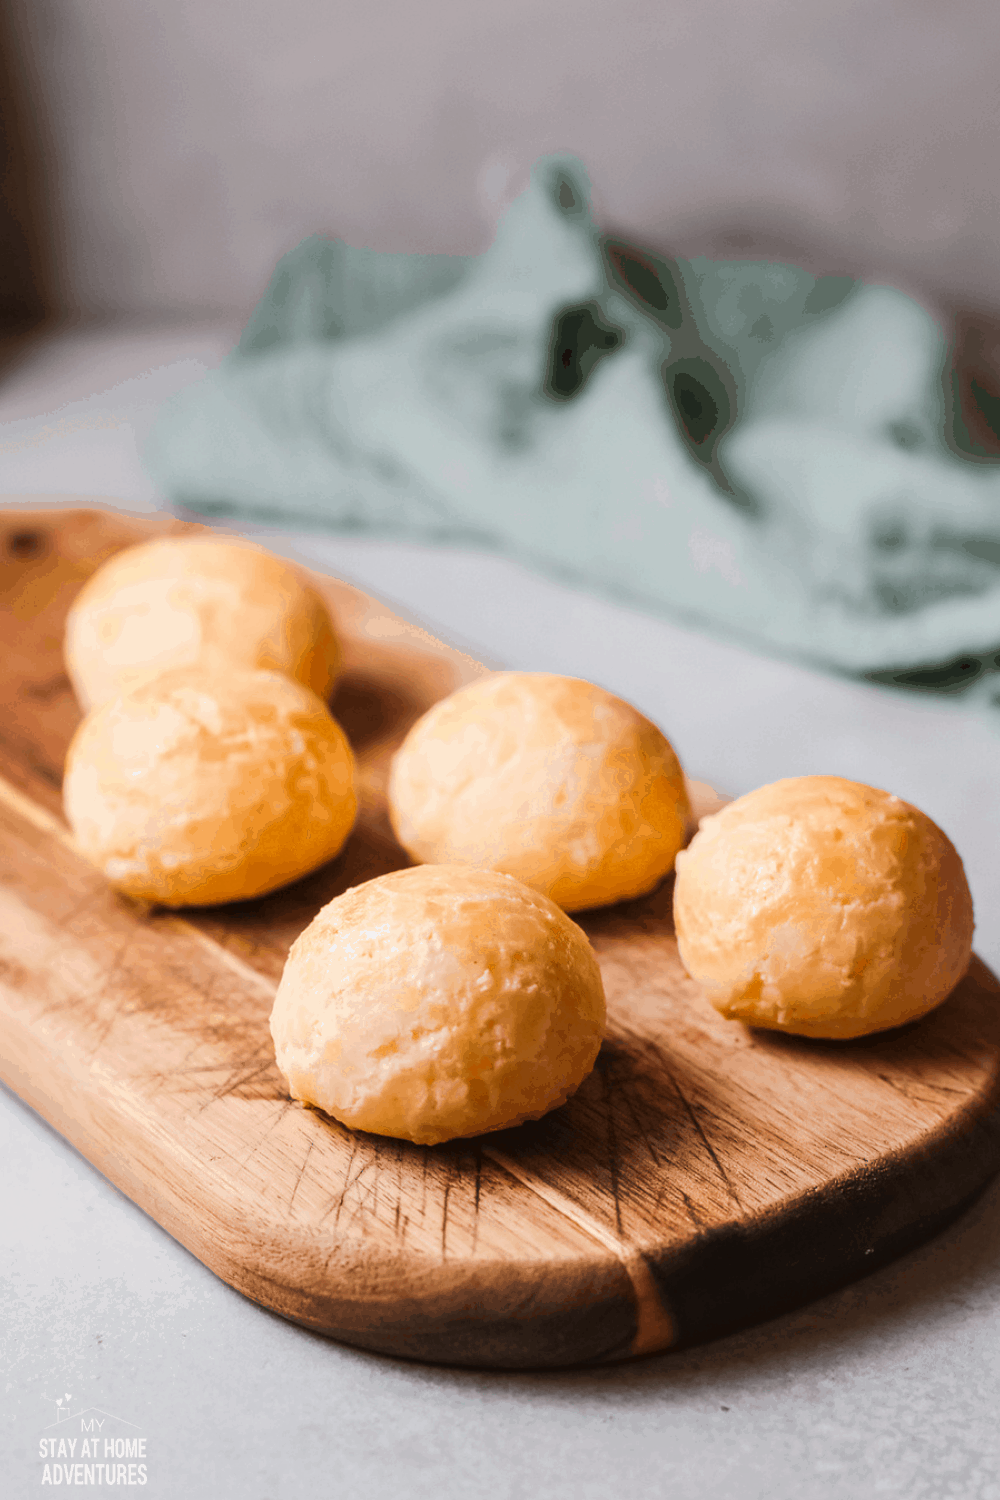 Pandebono or Colombia Cheese Bread is made with cassava starch and queso fresco, and this tasty treat is sure to become a favorite. via @mystayathome